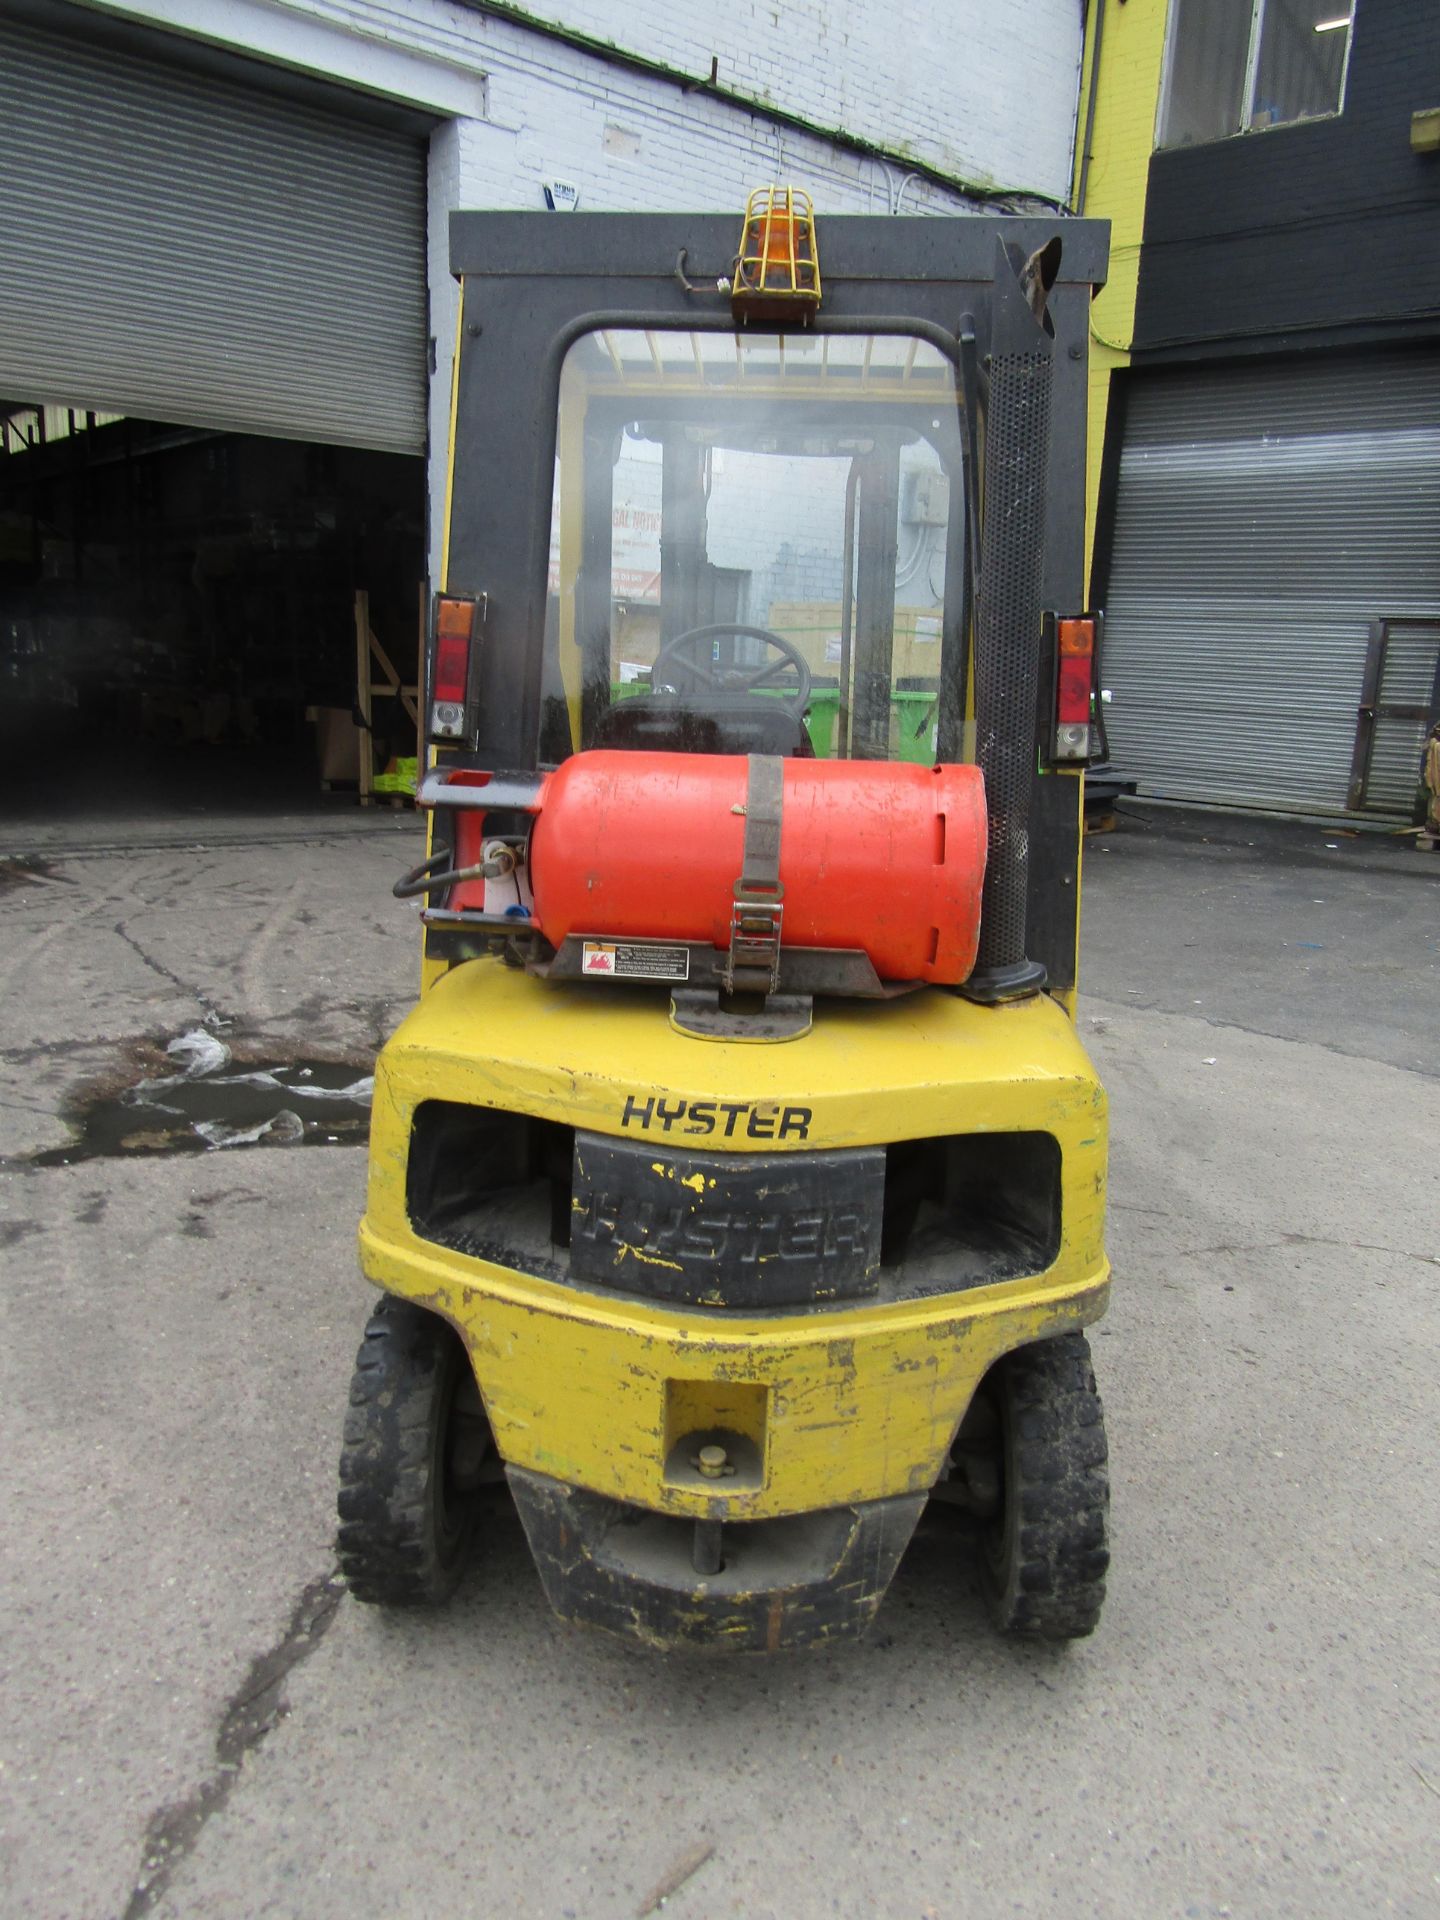 Hyster H2.00Xm Forklift Truck 7235 hours currently manufactured in 2004, has a roof as well as front - Bild 7 aus 12